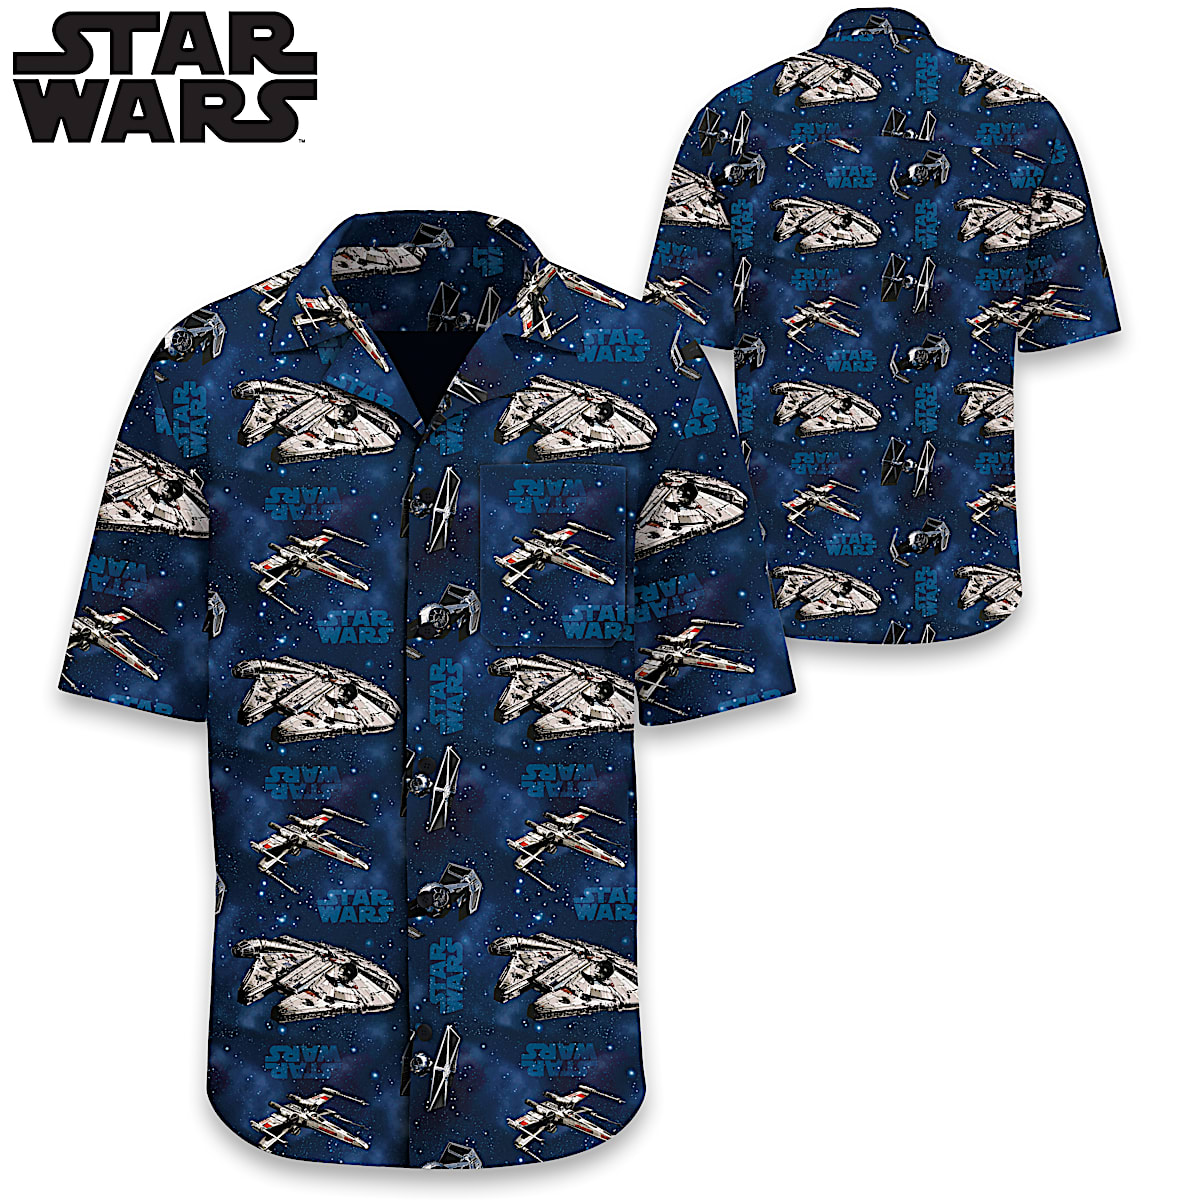 STAR WARS Shirt With An All-Over Galaxy Print Featuring An X-Wing ...